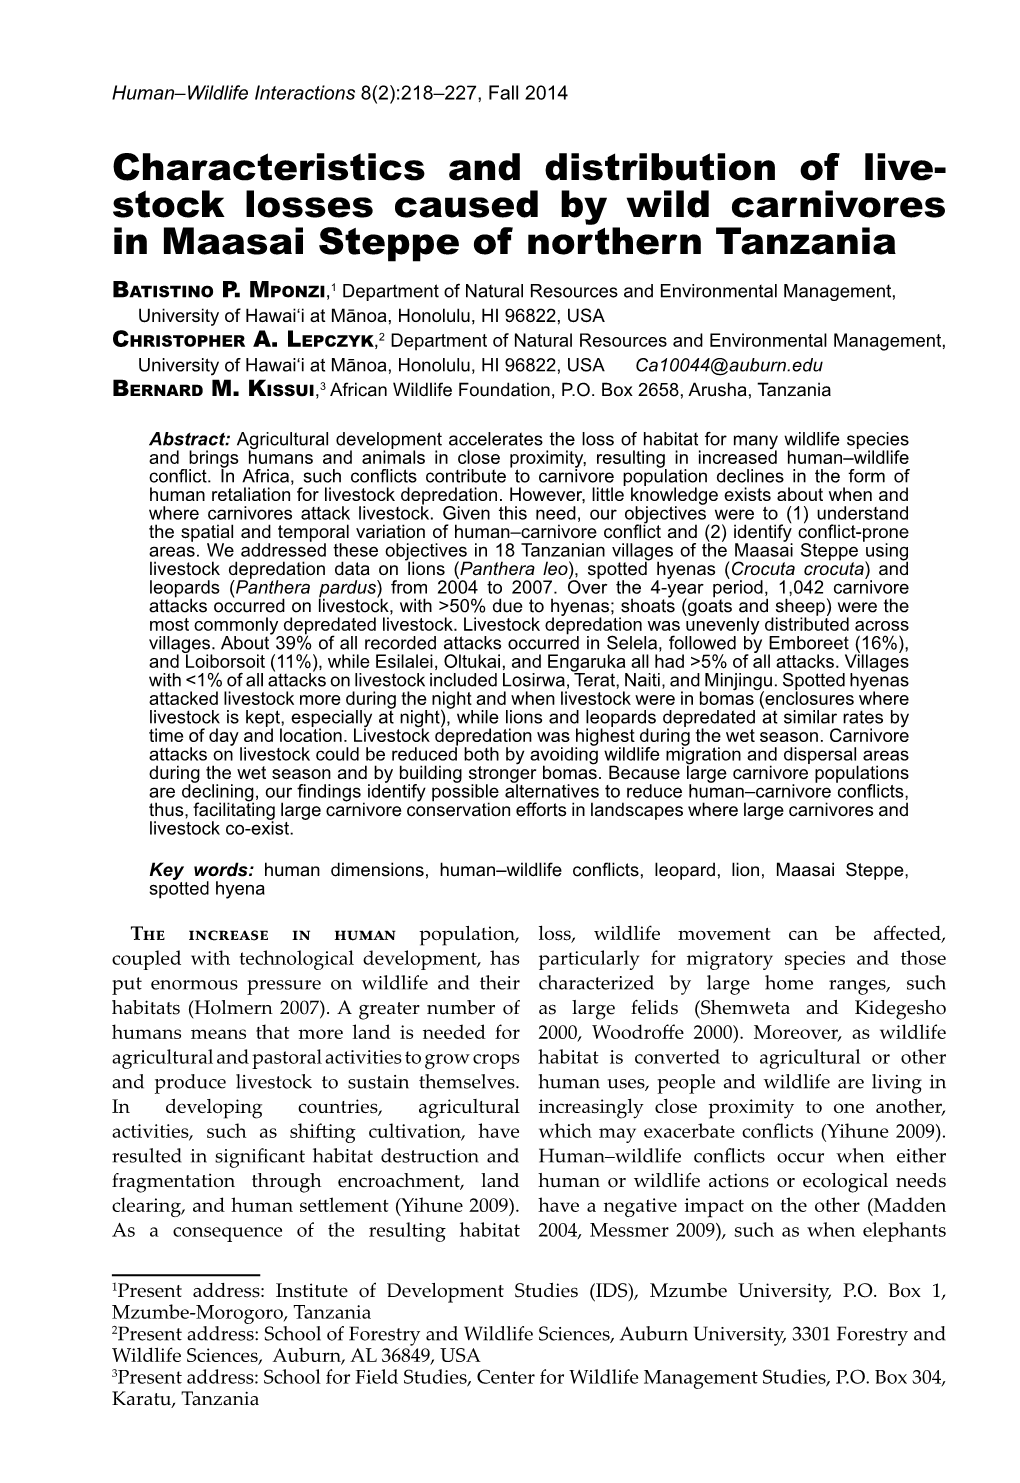 Characteristics and Distribution of Live-Stock Losses Caused by Wild Carnivores in Maasai Steppe of Northern Tanzania